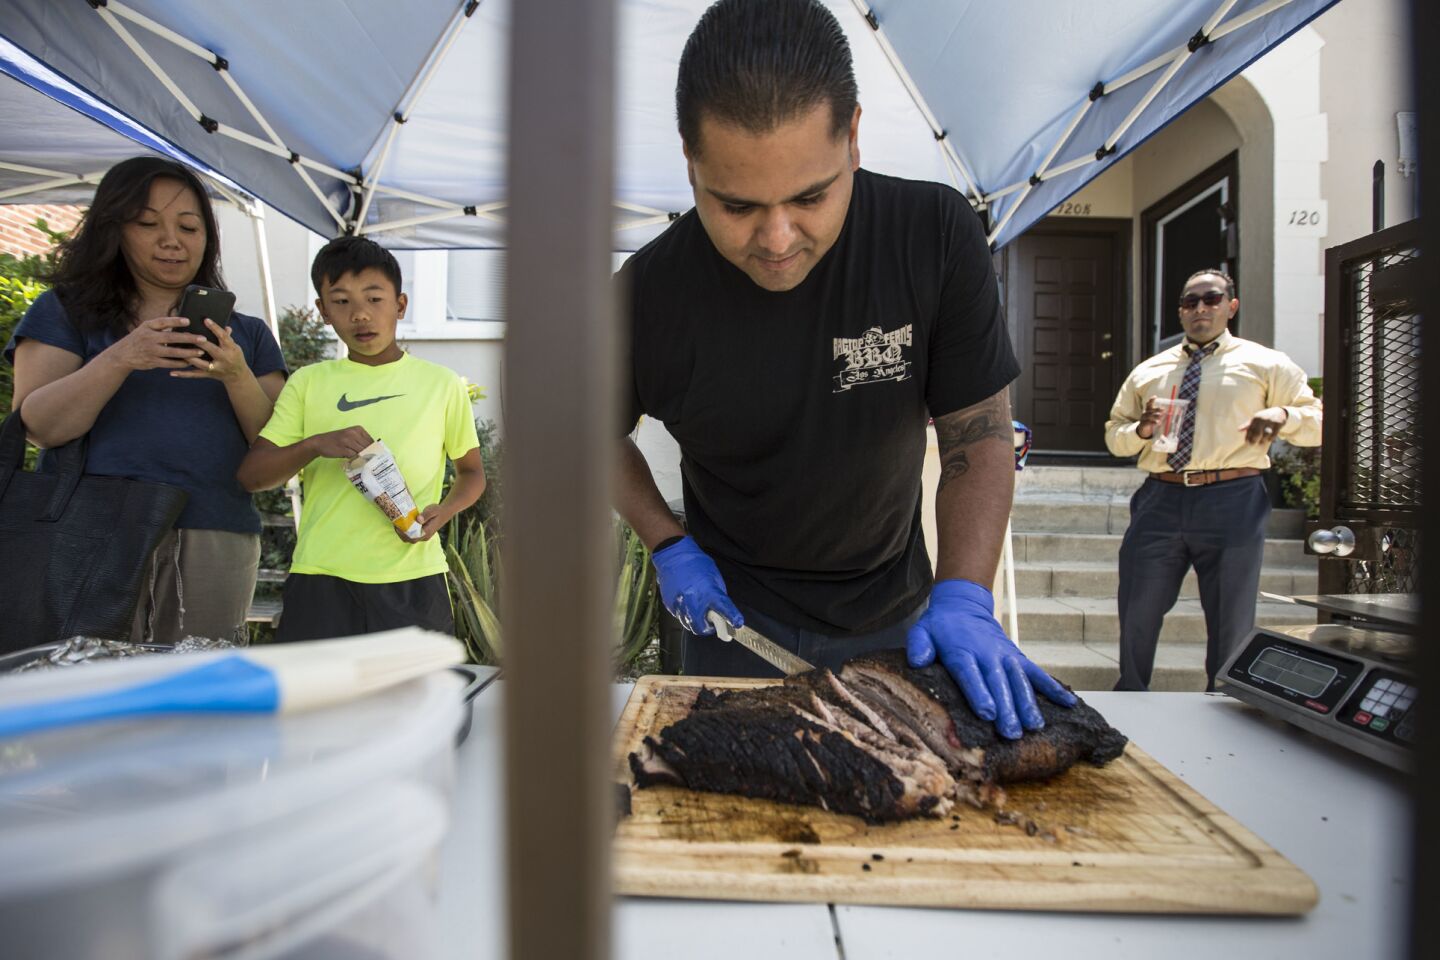 Latino BBQ joints in L.A.